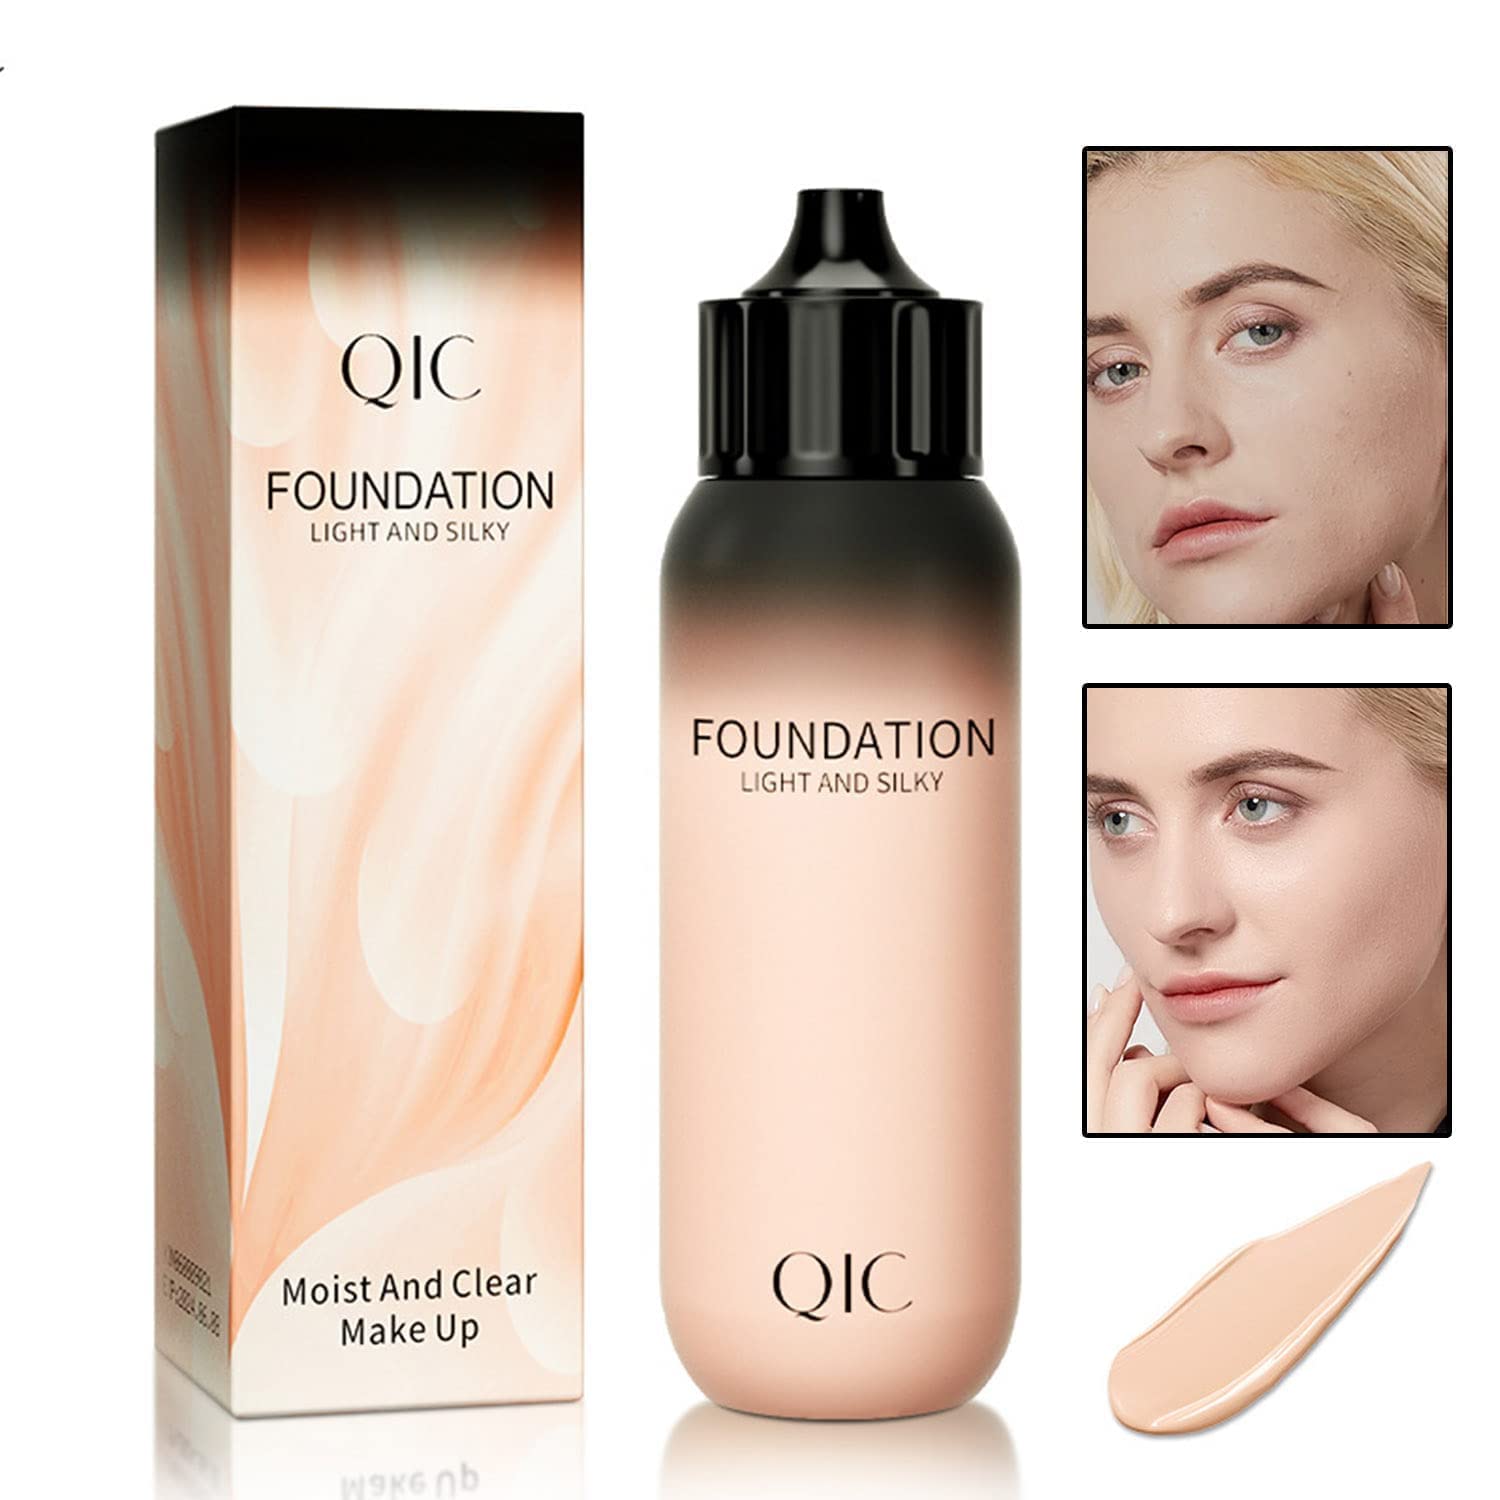 Light and Silky Full Coverage Foundation for Dry Skin